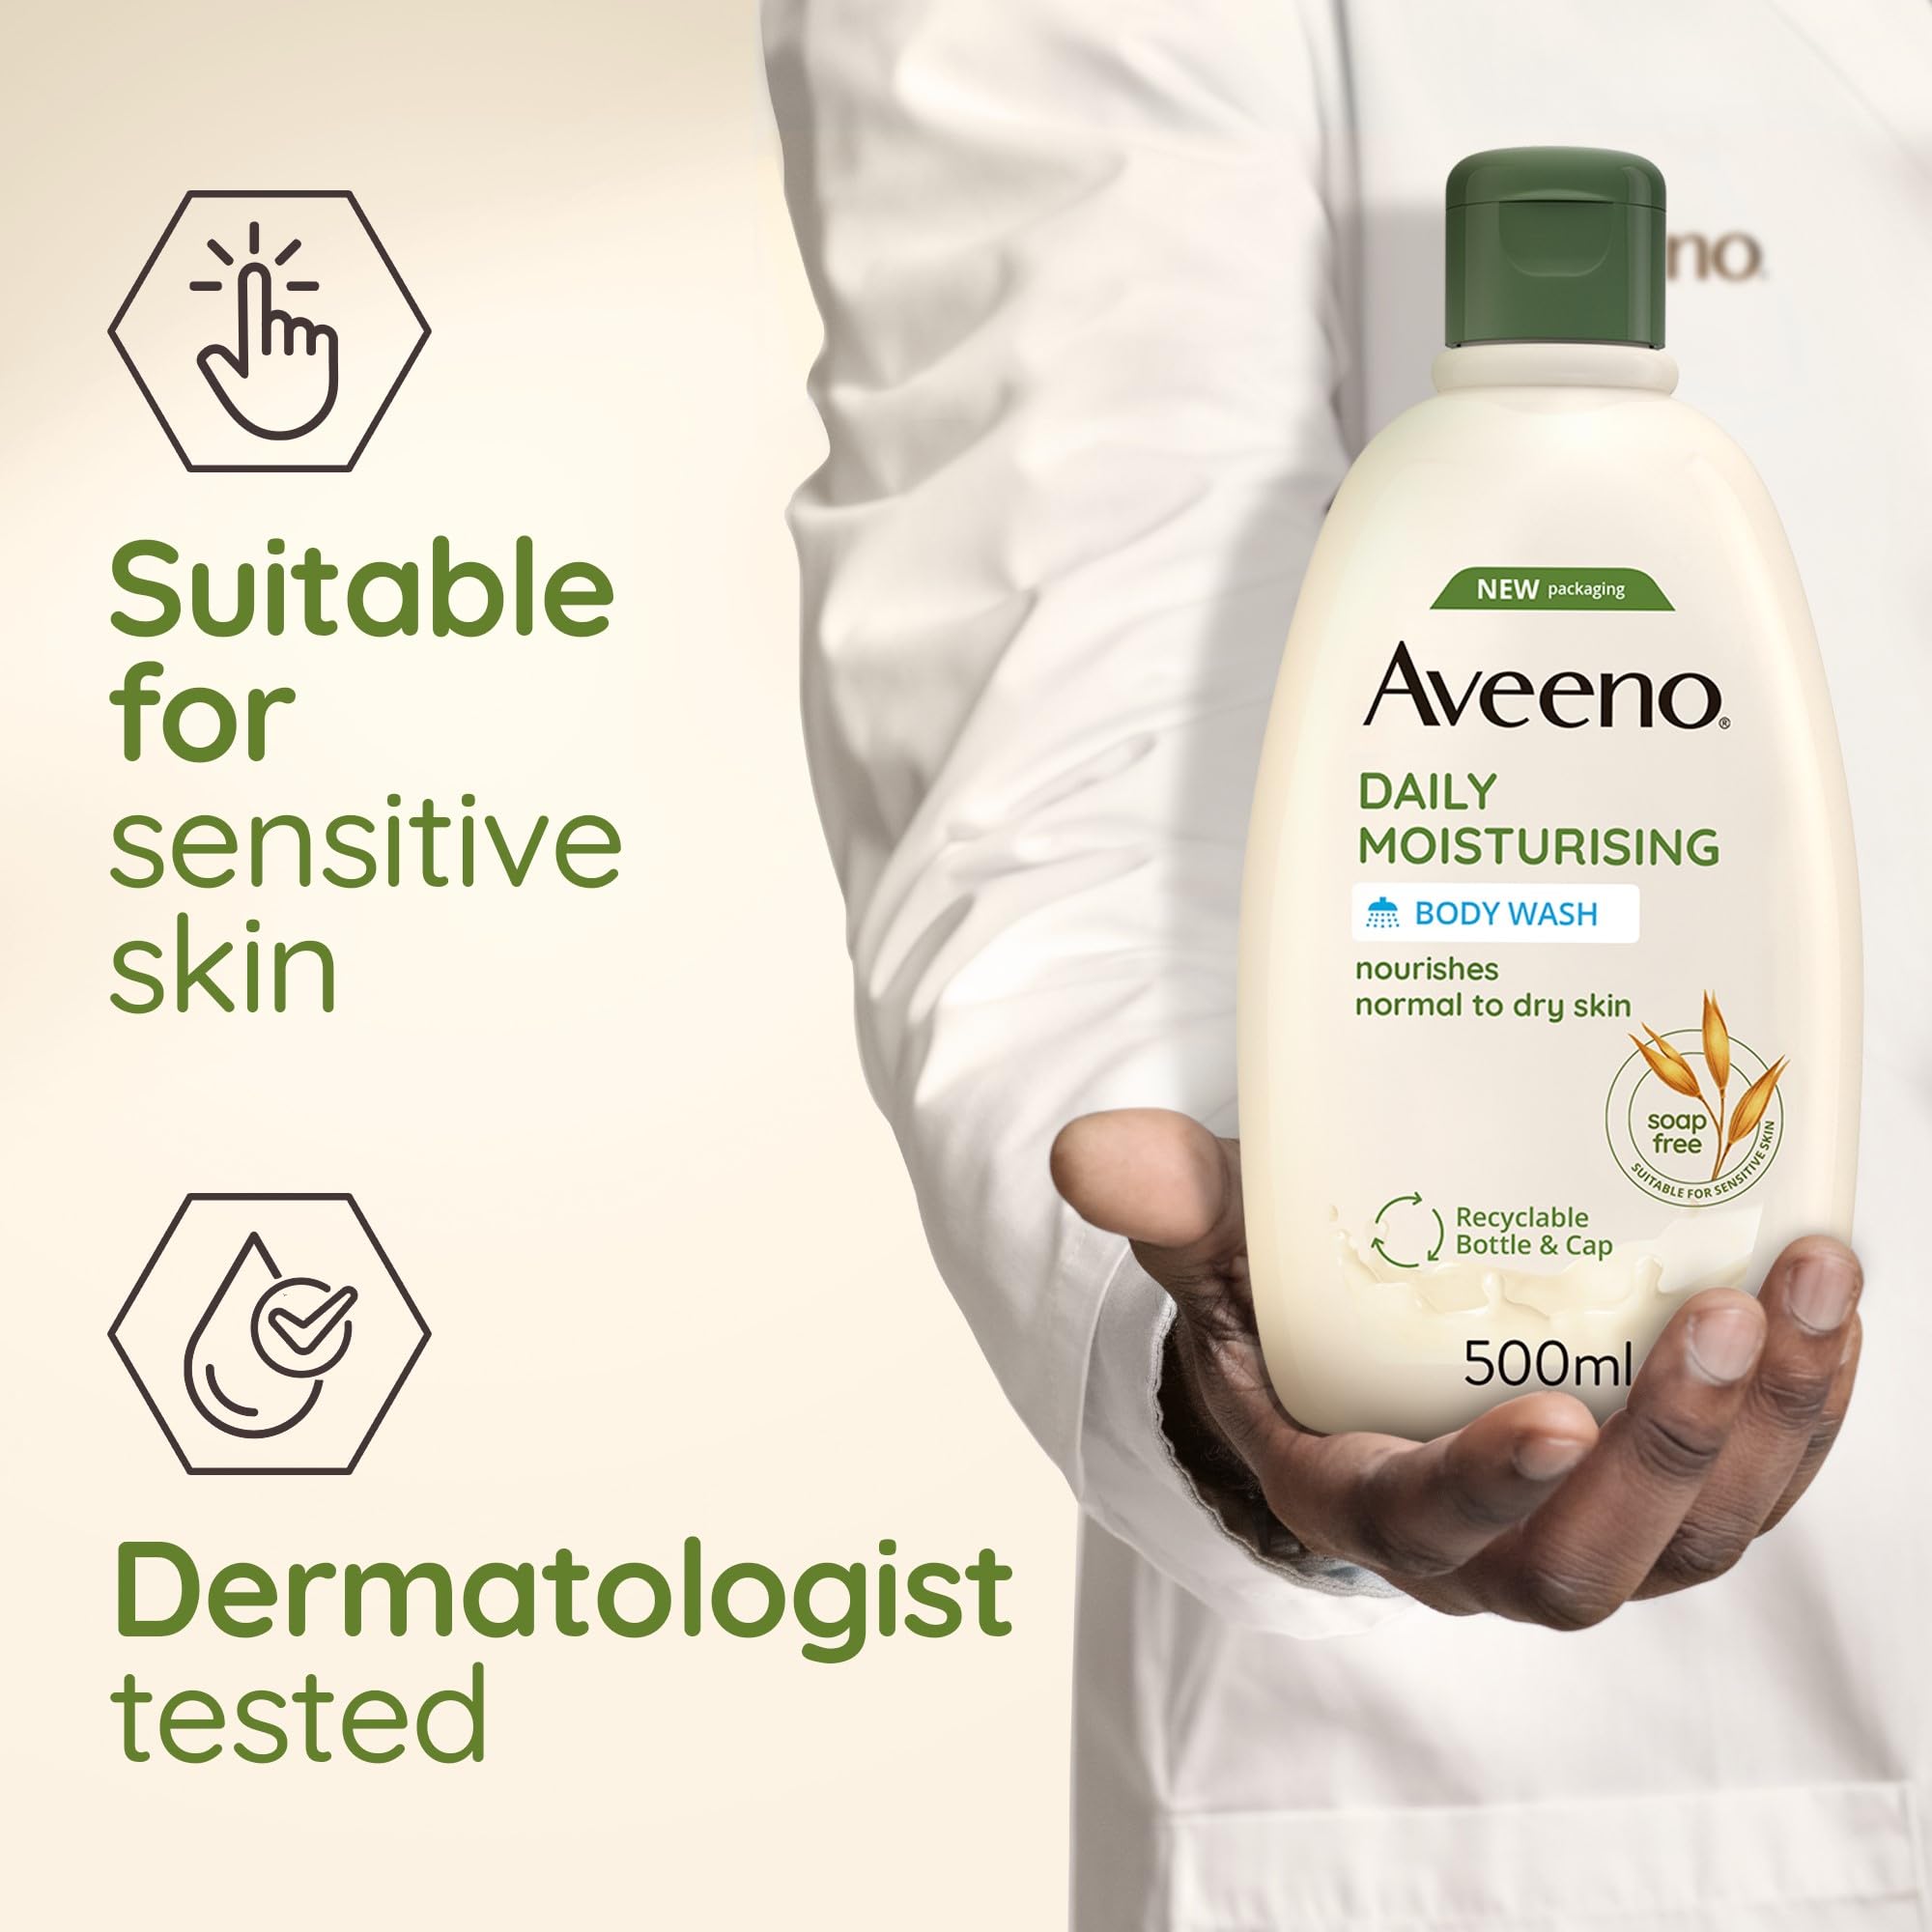 Aveeno Daily Moisturising Body Wash, With Soothing Oat, Suitable For Sensitive Skin, Gently Cleanses and Nourishes, Soap-Free, Lightly Scented, 500ml